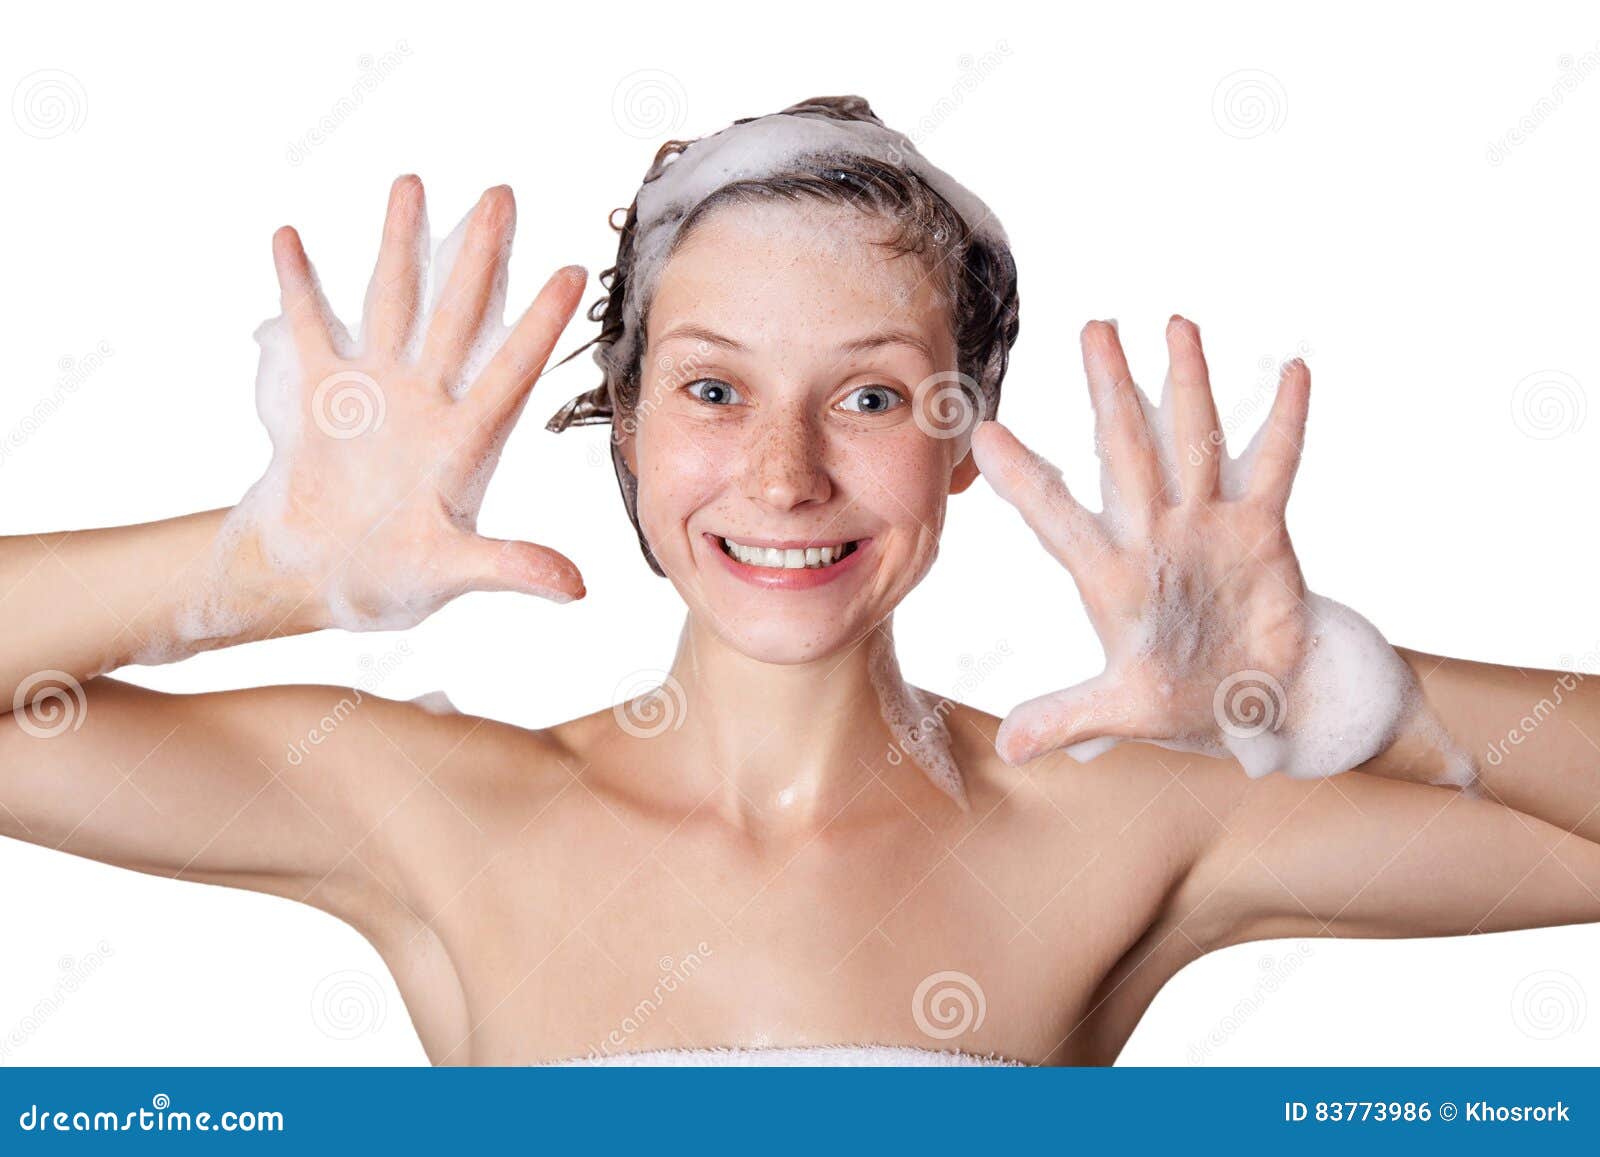 Beautiful Woman Taking A Shower And Shampooing Her Hair 